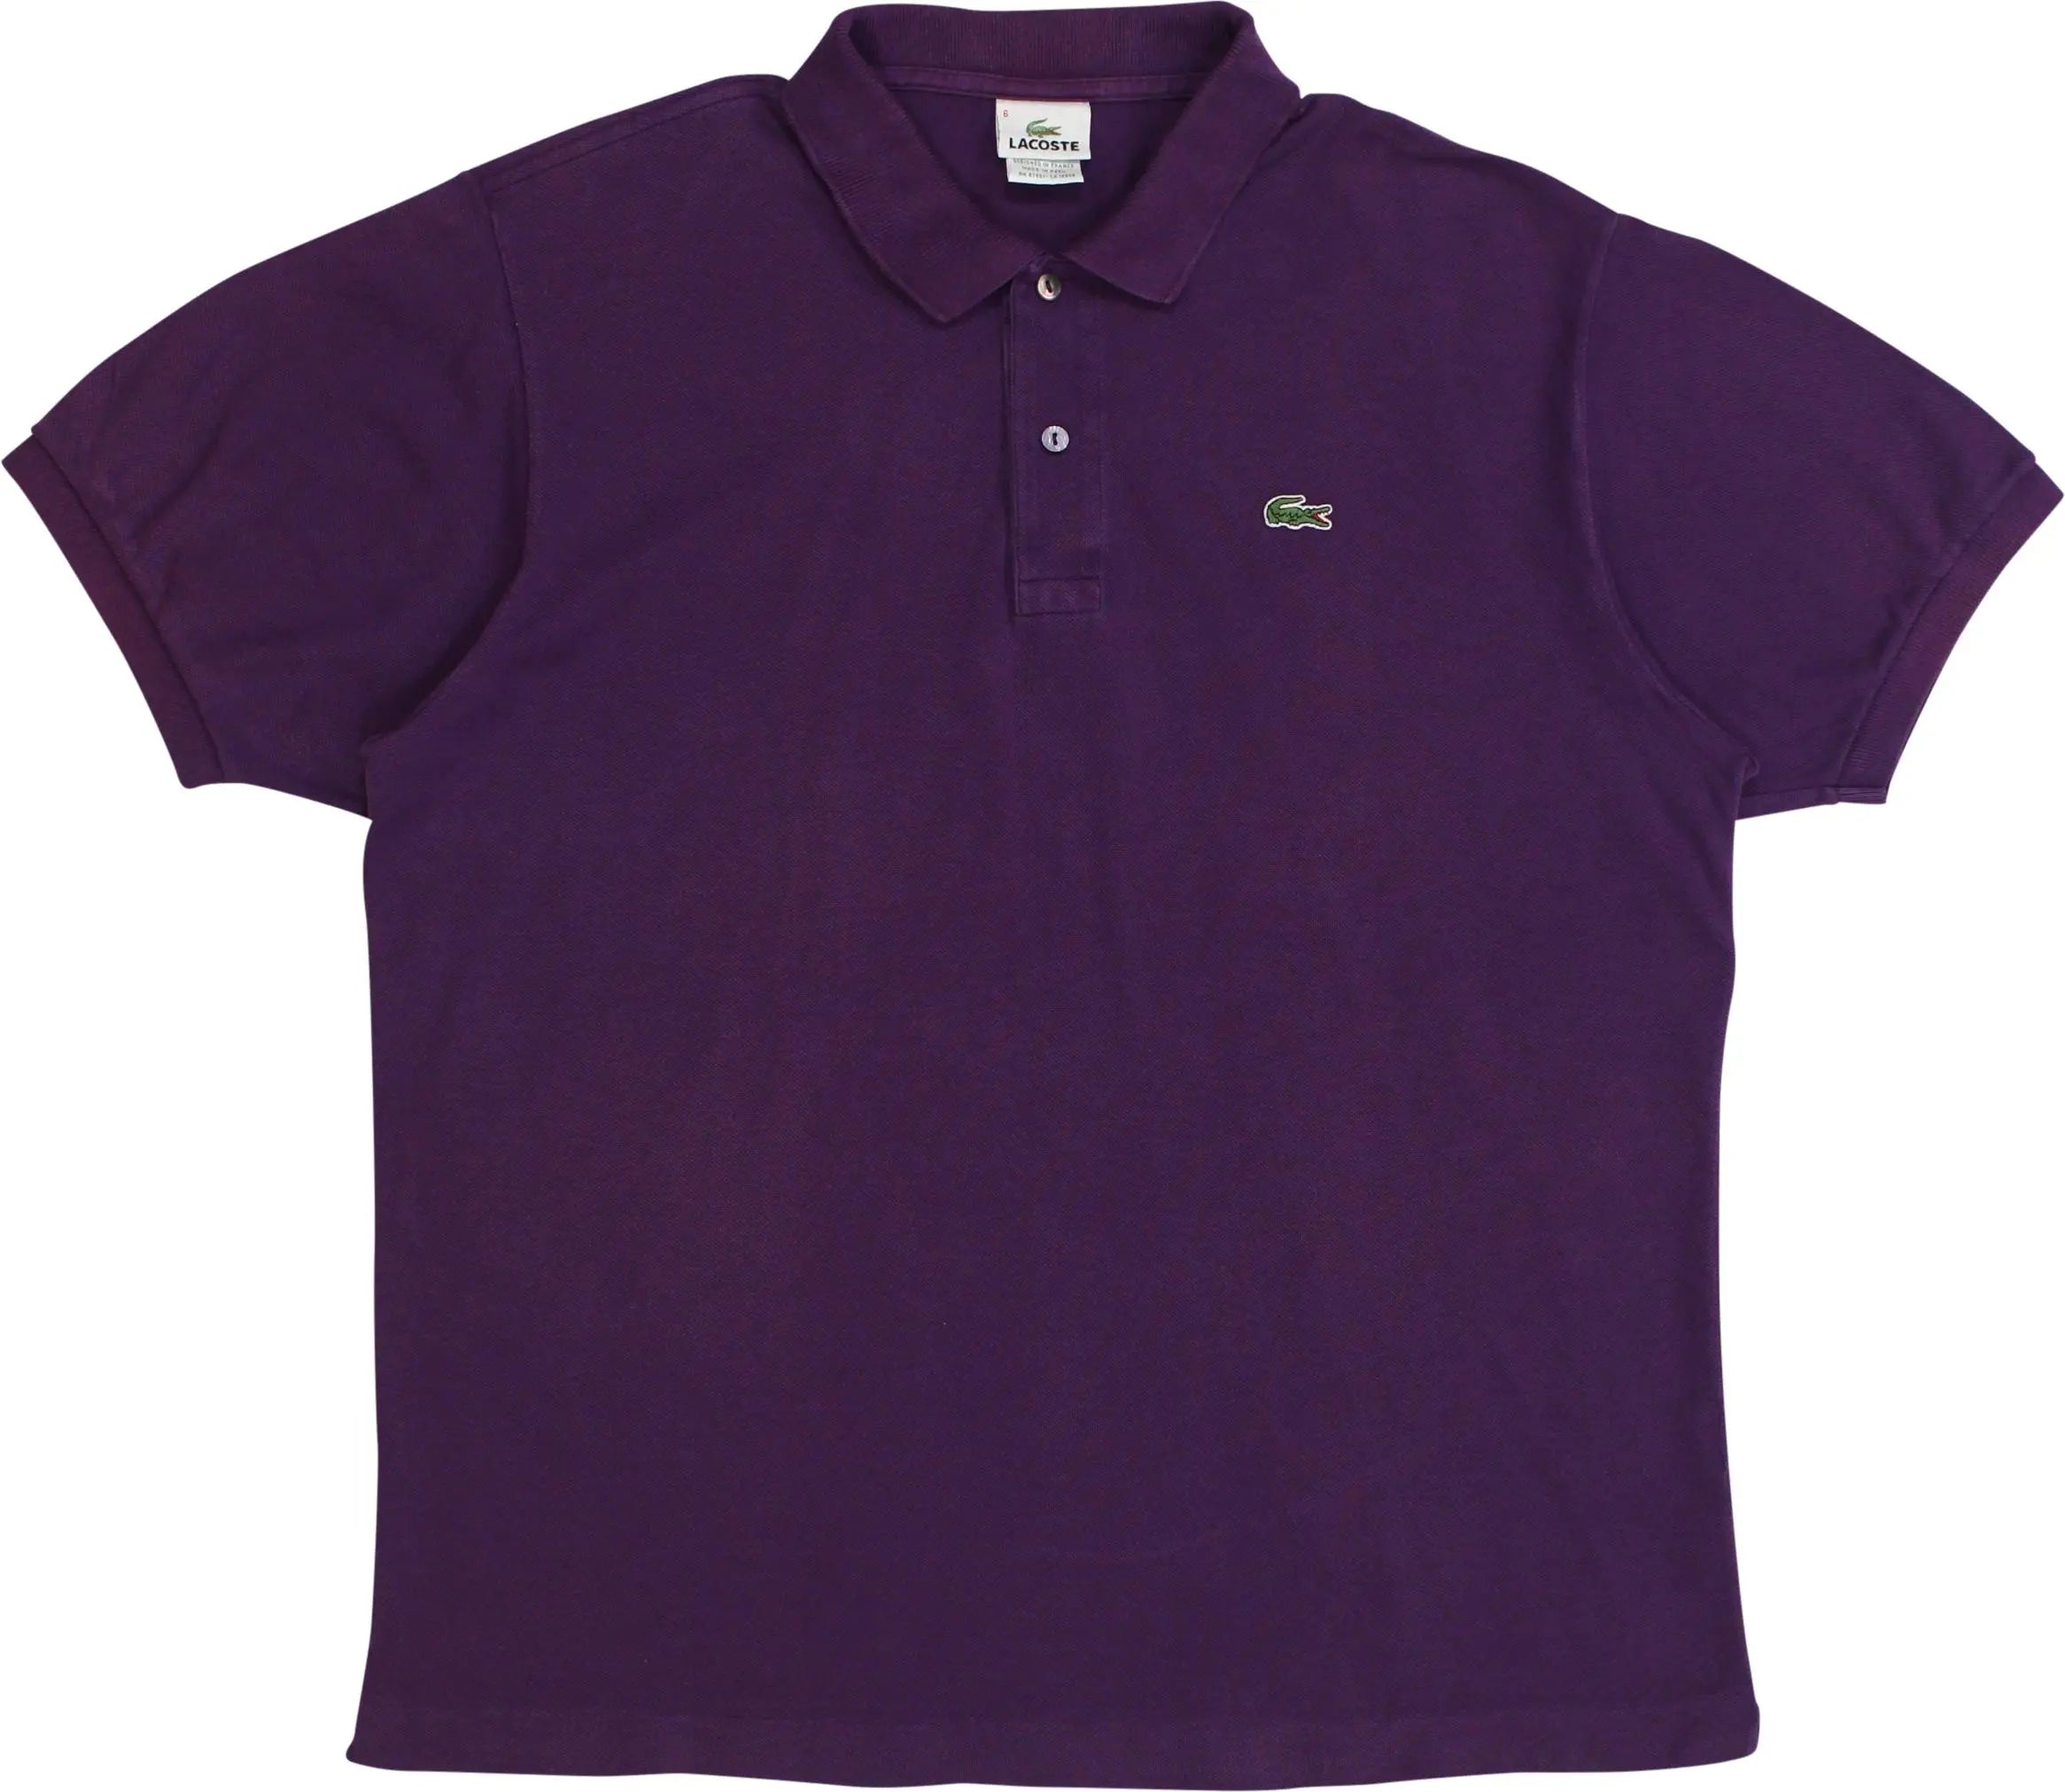 Lacoste - Purple Polo Shirt by Lacoste- ThriftTale.com - Vintage and second handclothing